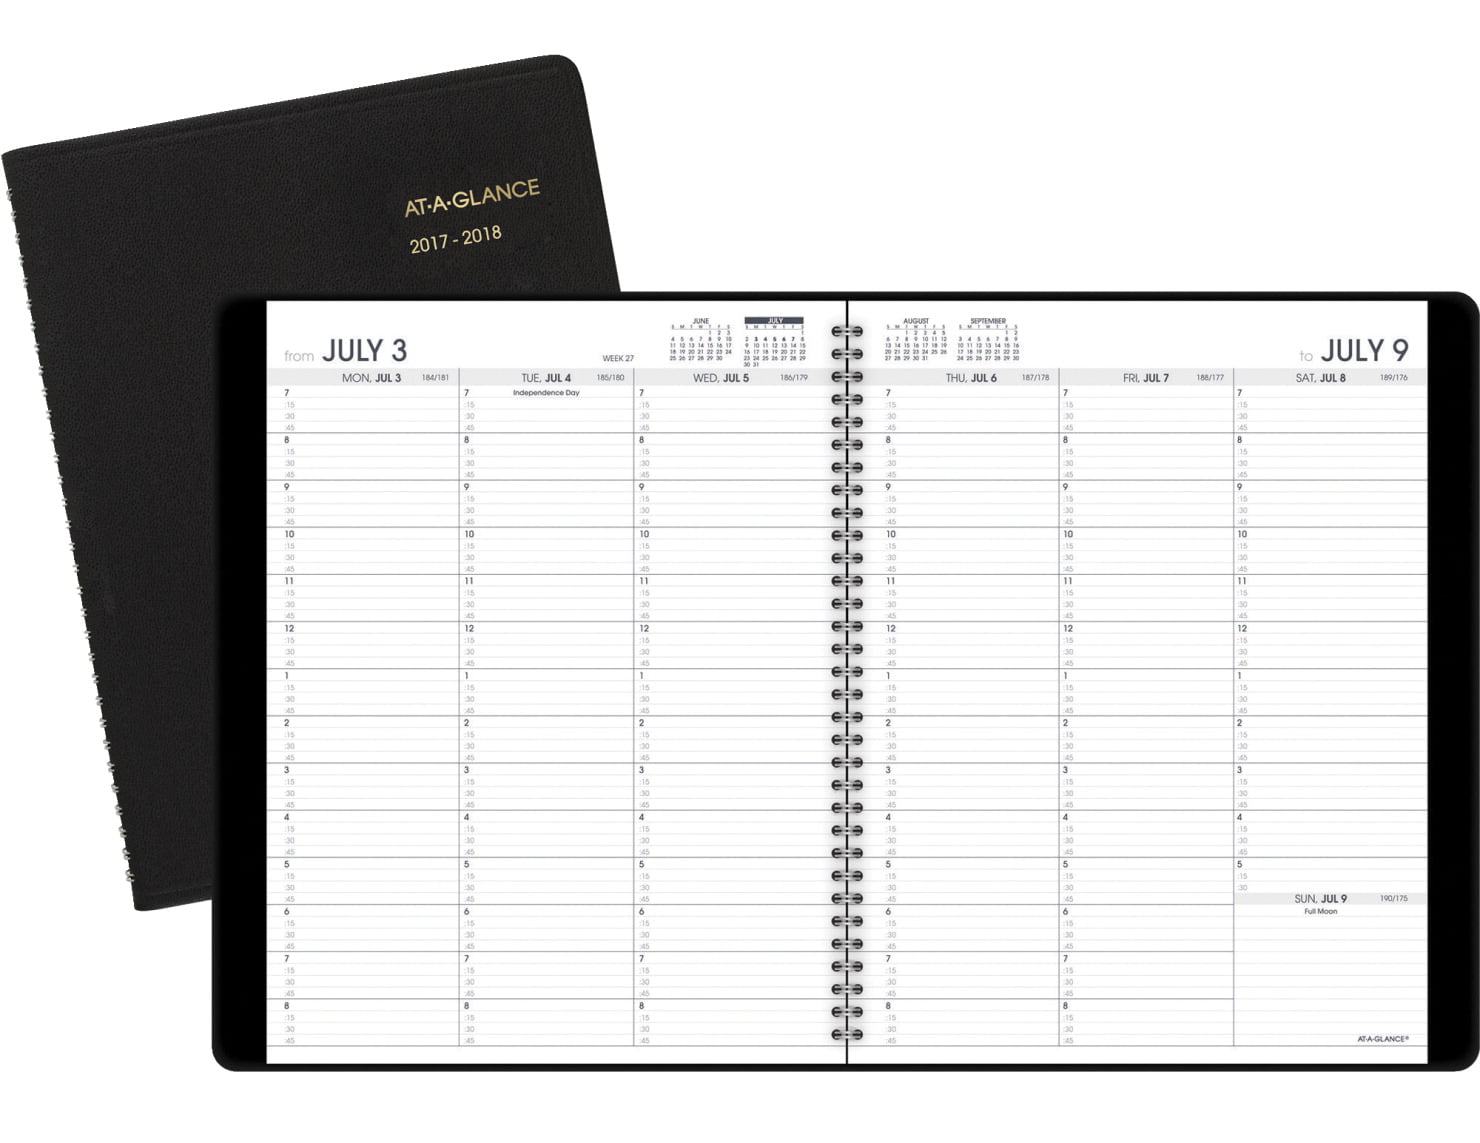 At-A-Glance Black Weekly Appointment Book measuring 8-1/2 in x